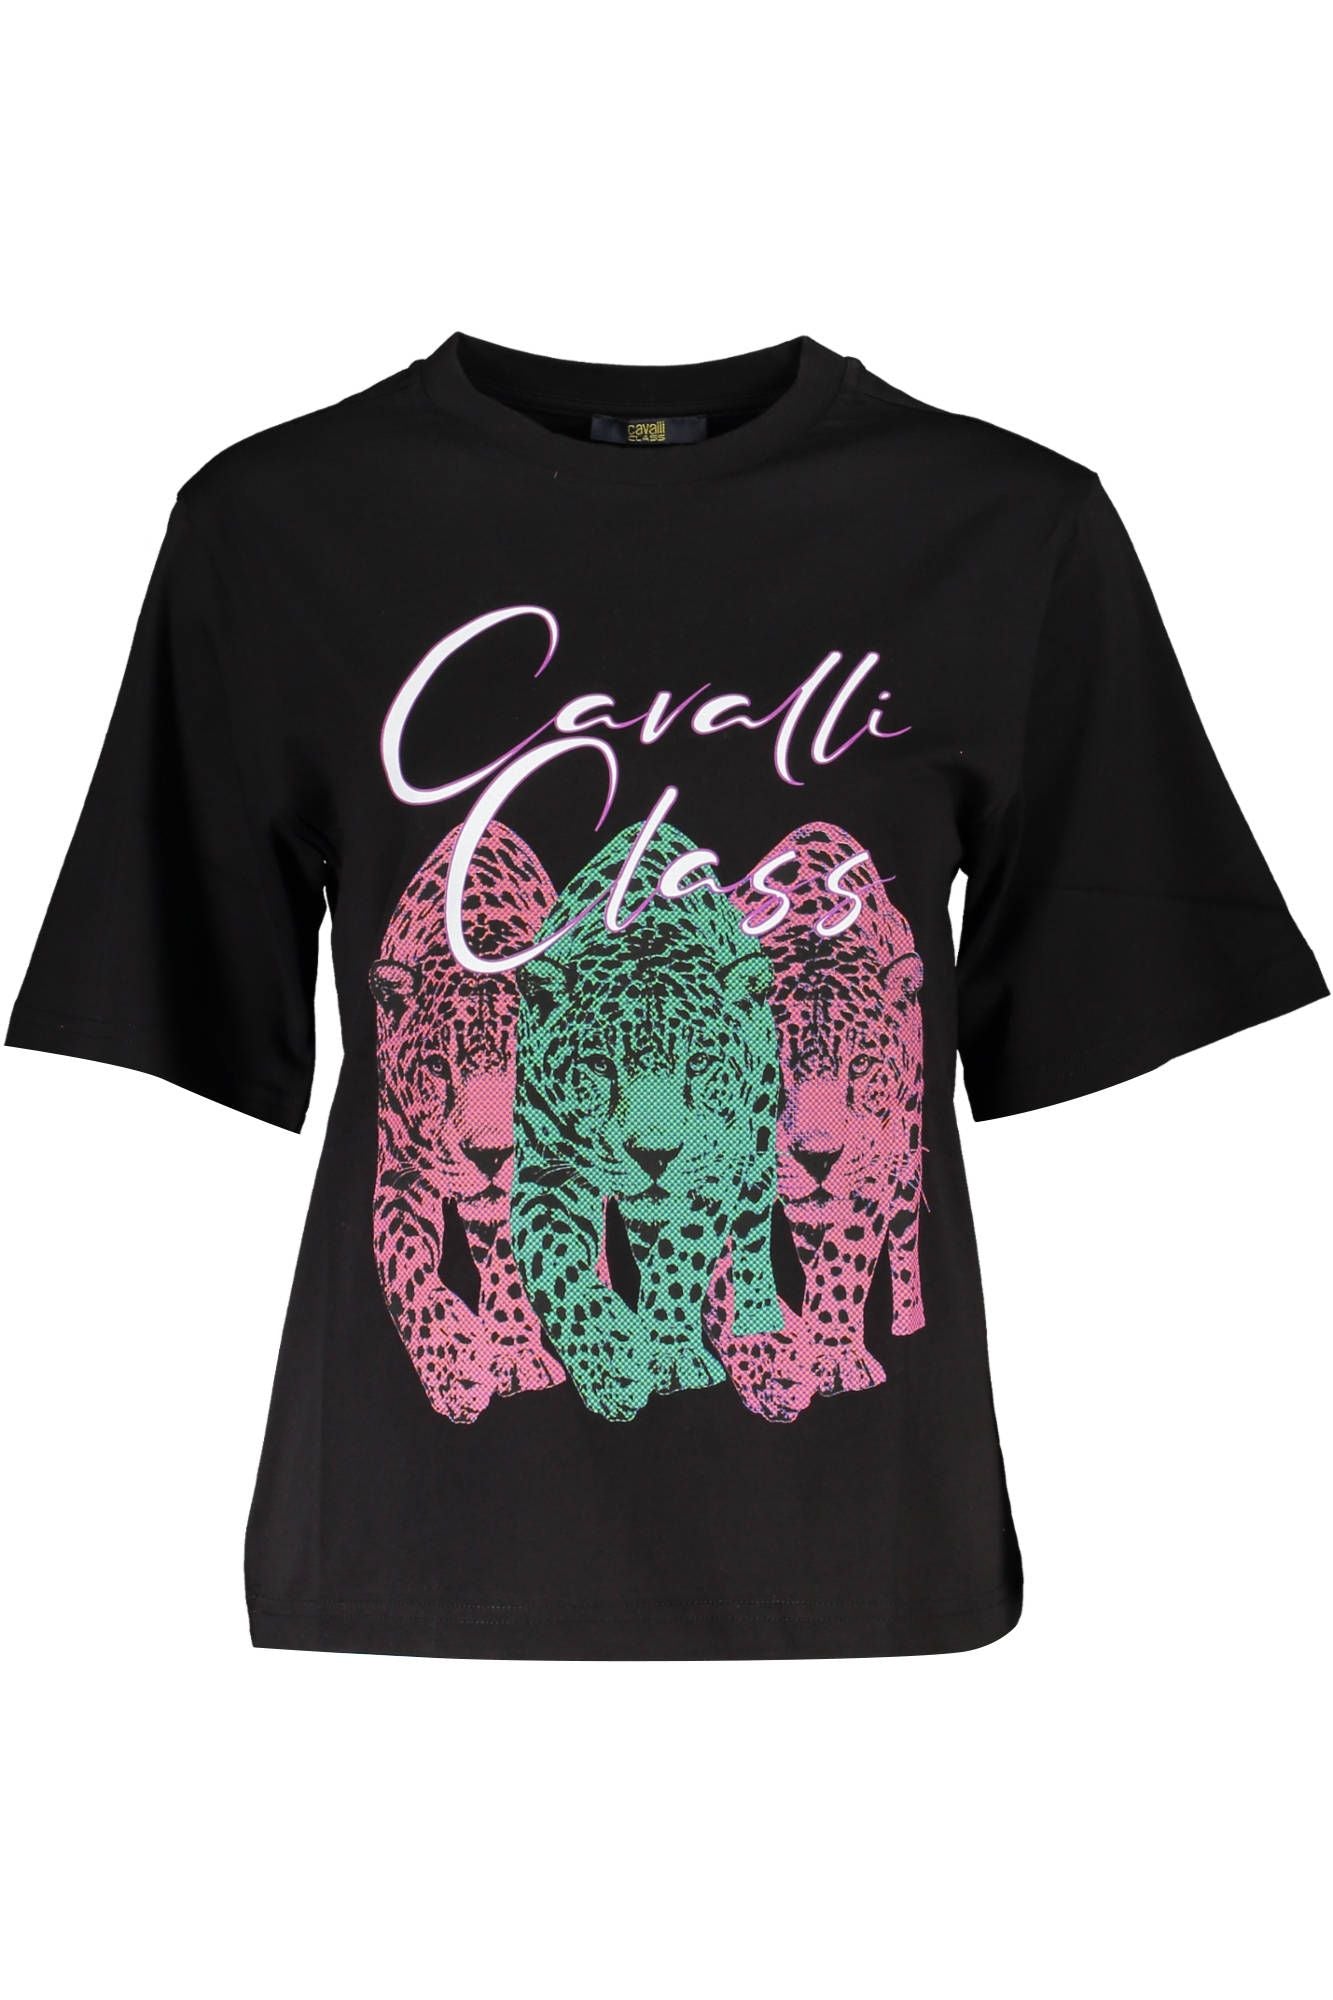 Cavalli Class Chic Slim Fit Tee with Iconic Print